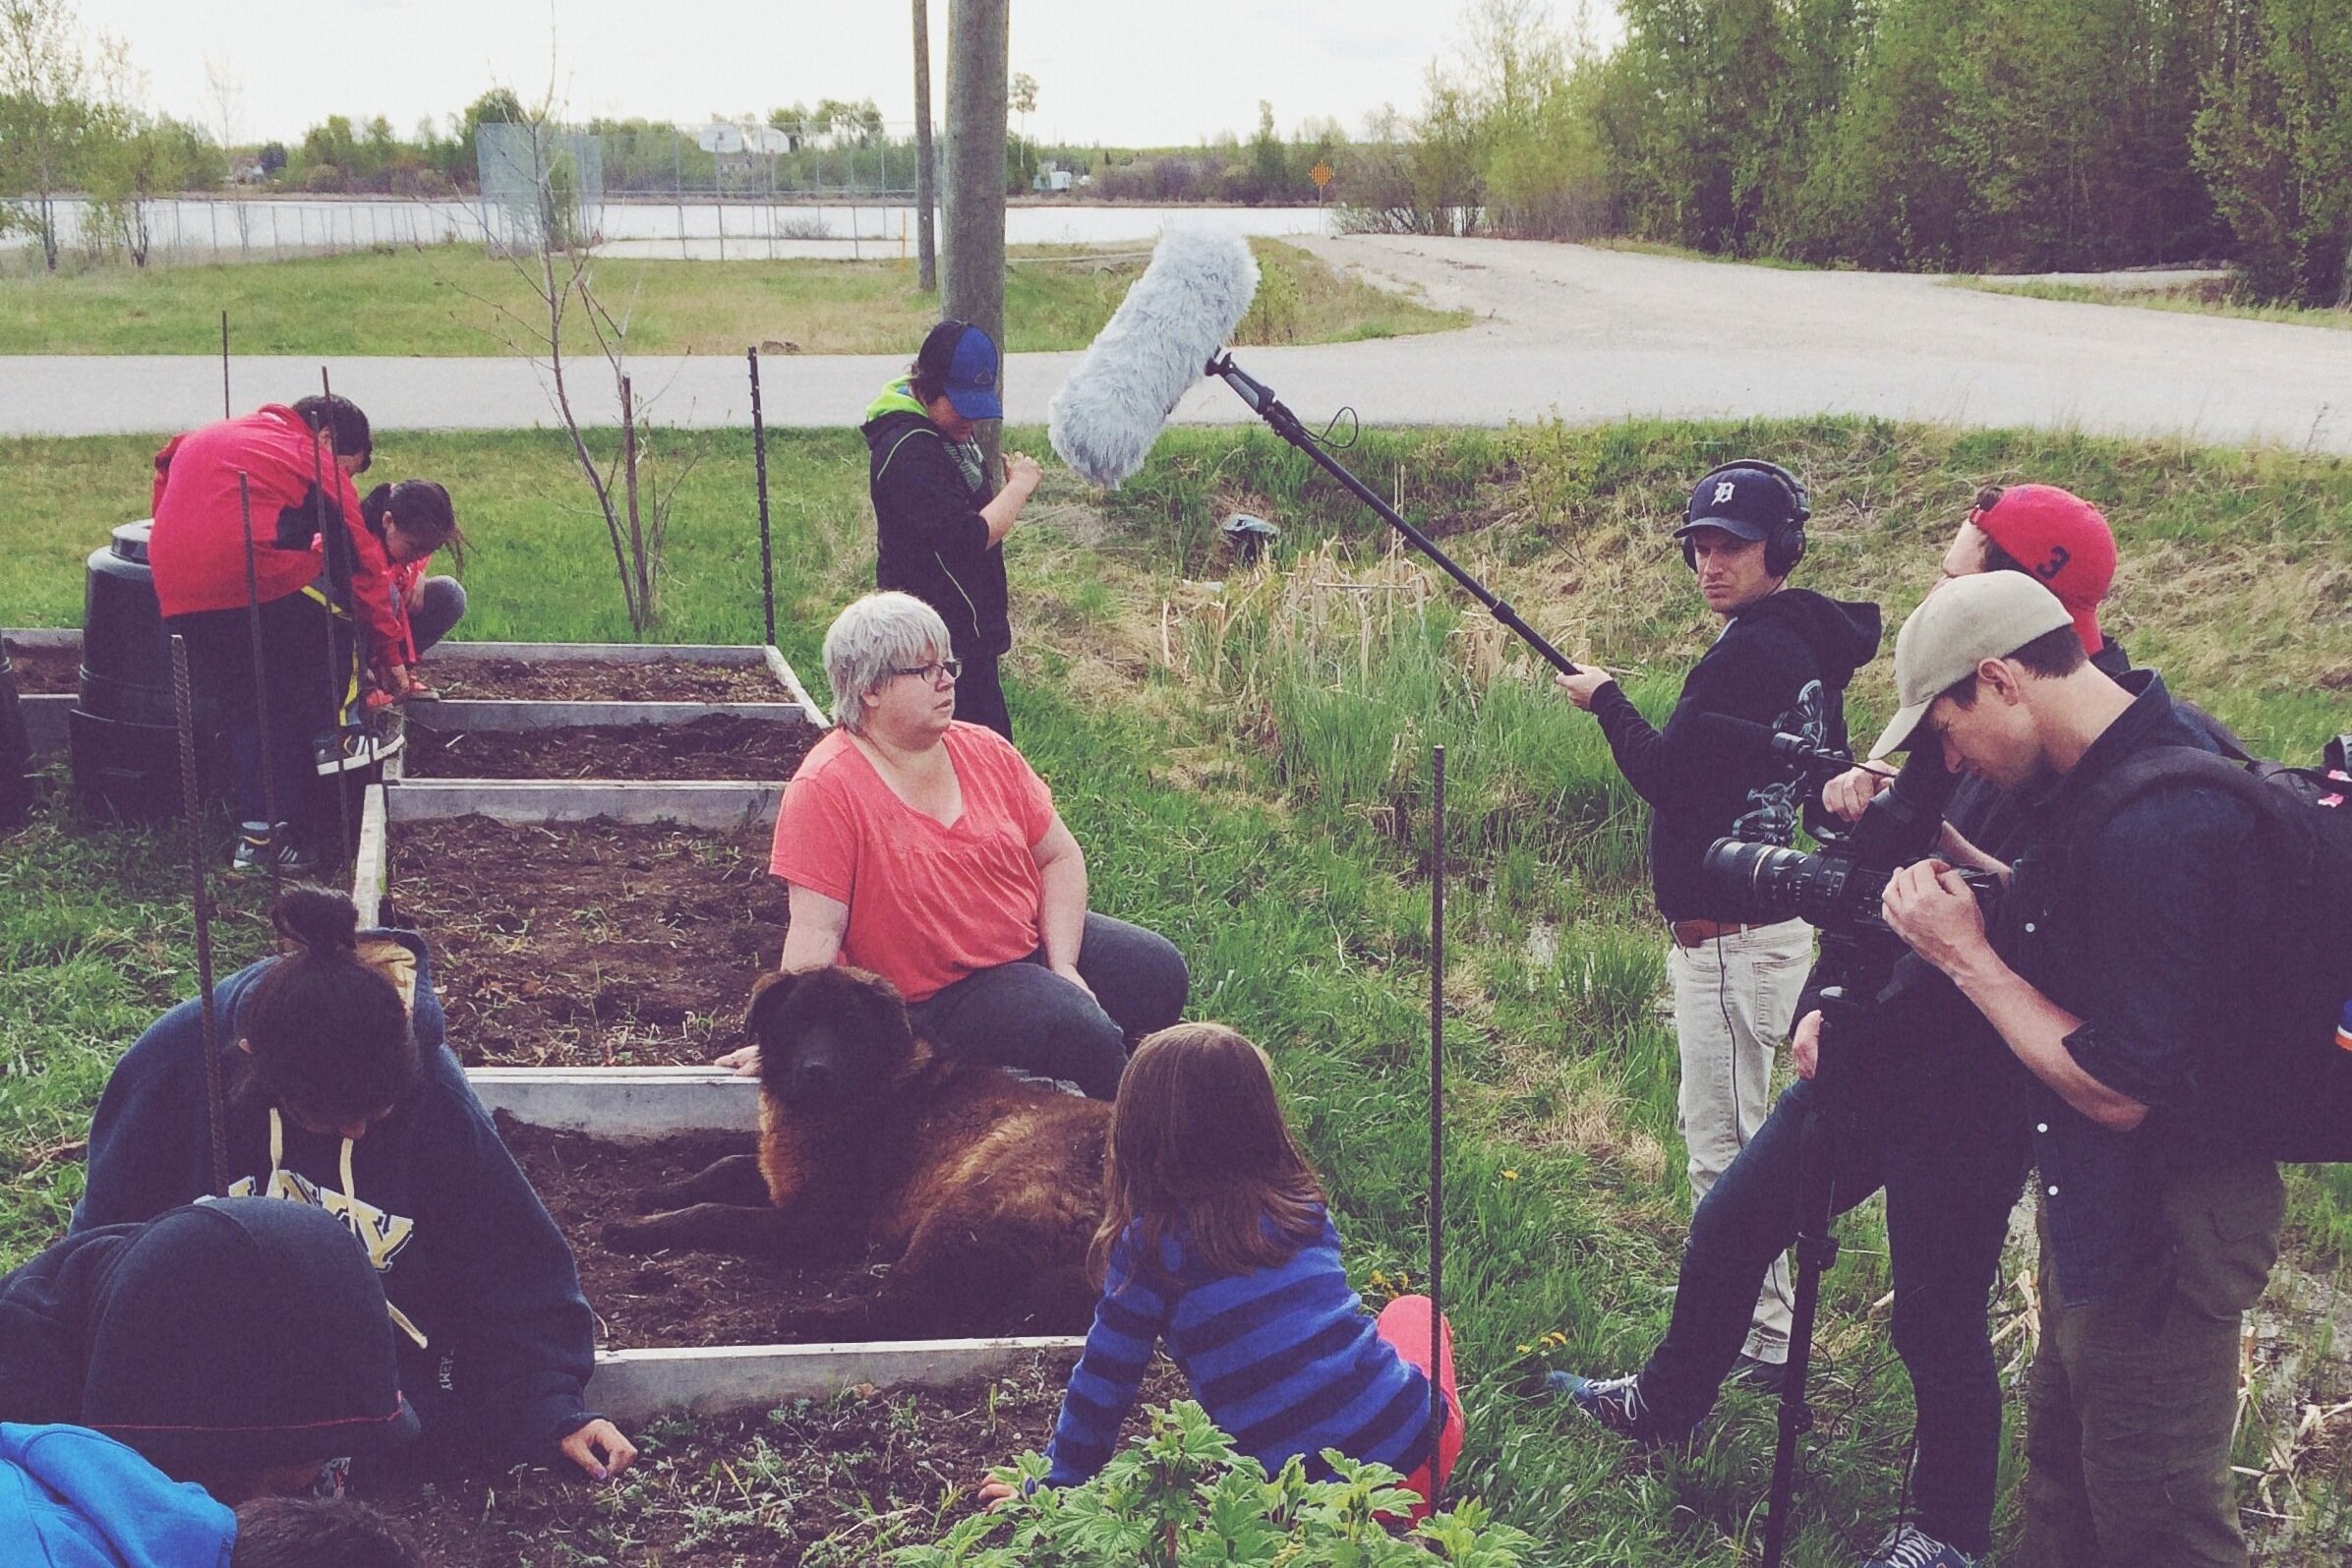  On location for A Right to Eat, 2014 